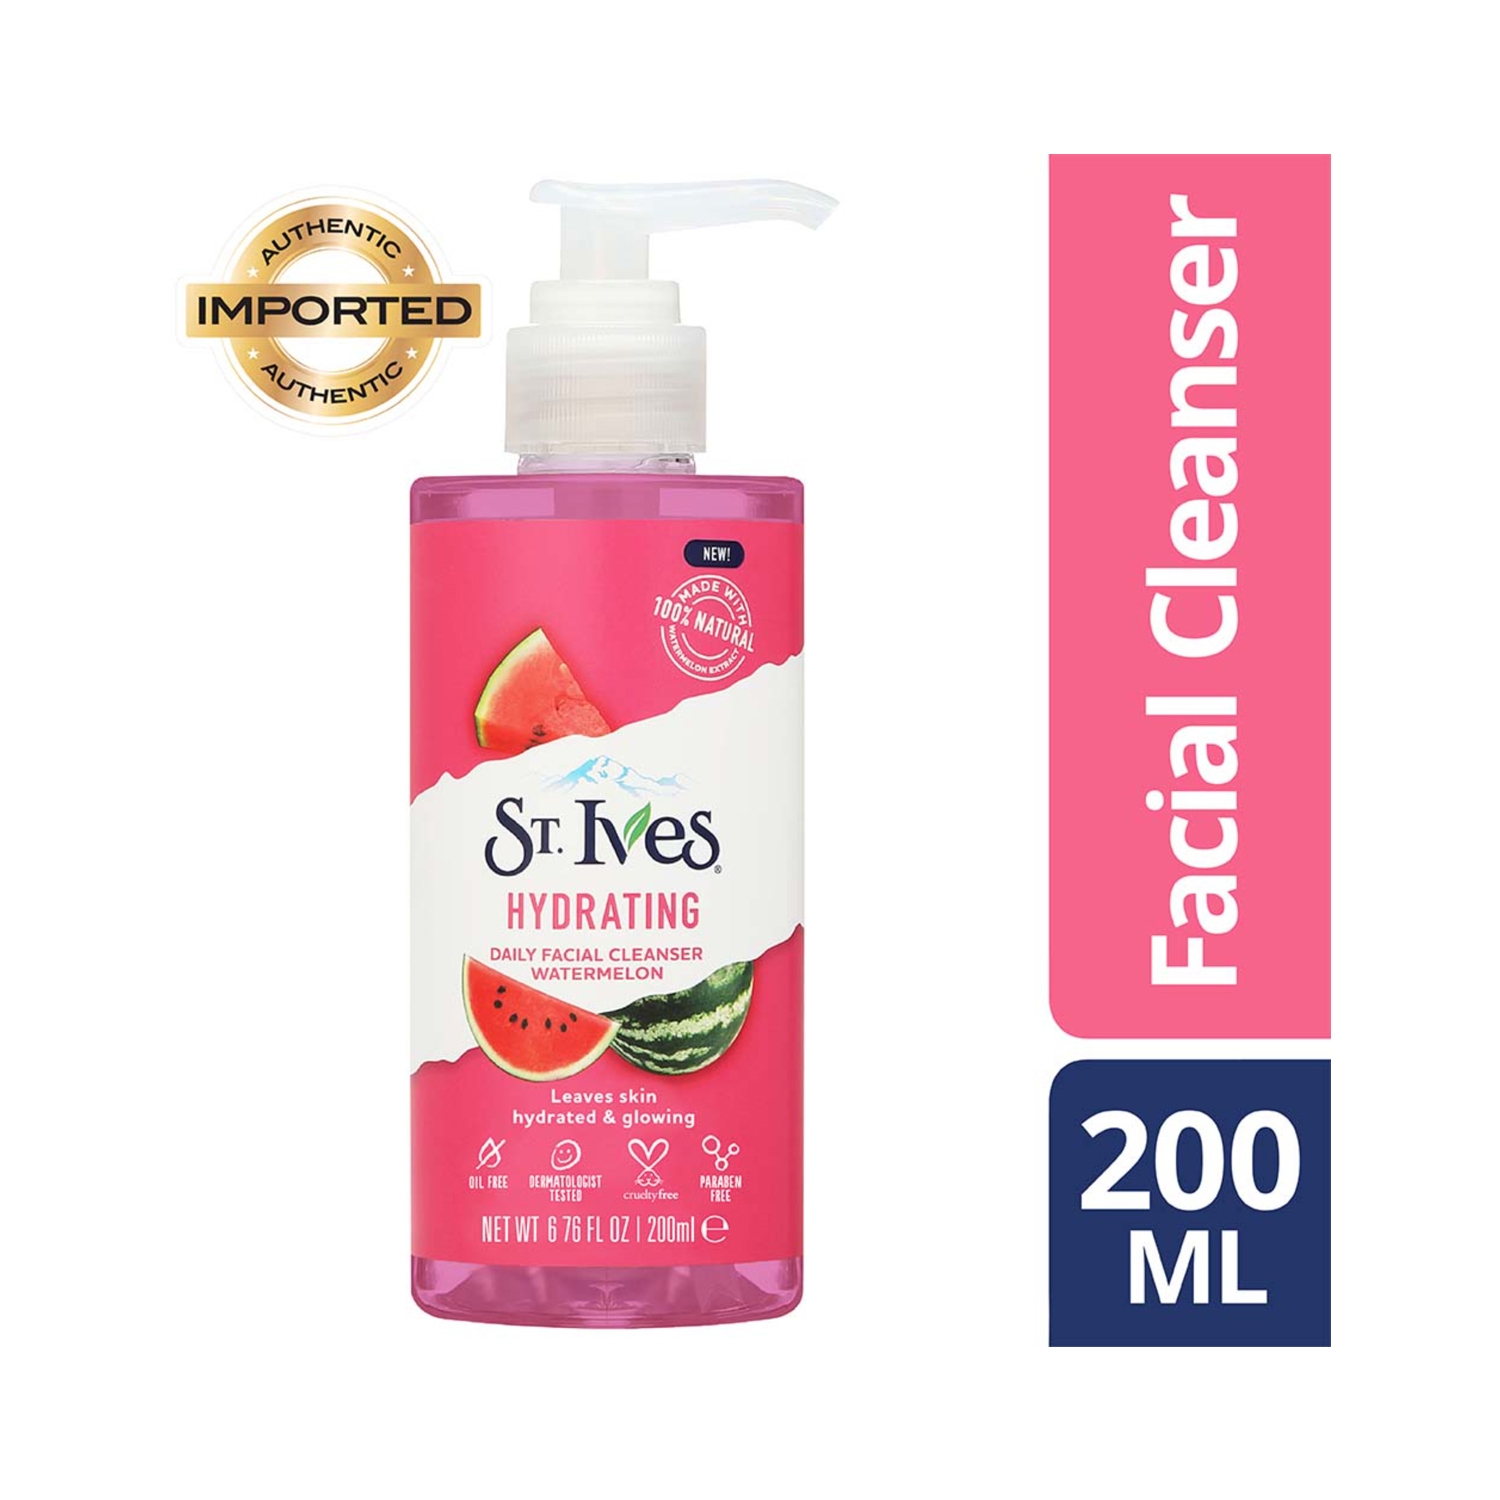 St. Ives | St. Ives Hydrating Daily Watermelon Facial Cleanser (200ml)